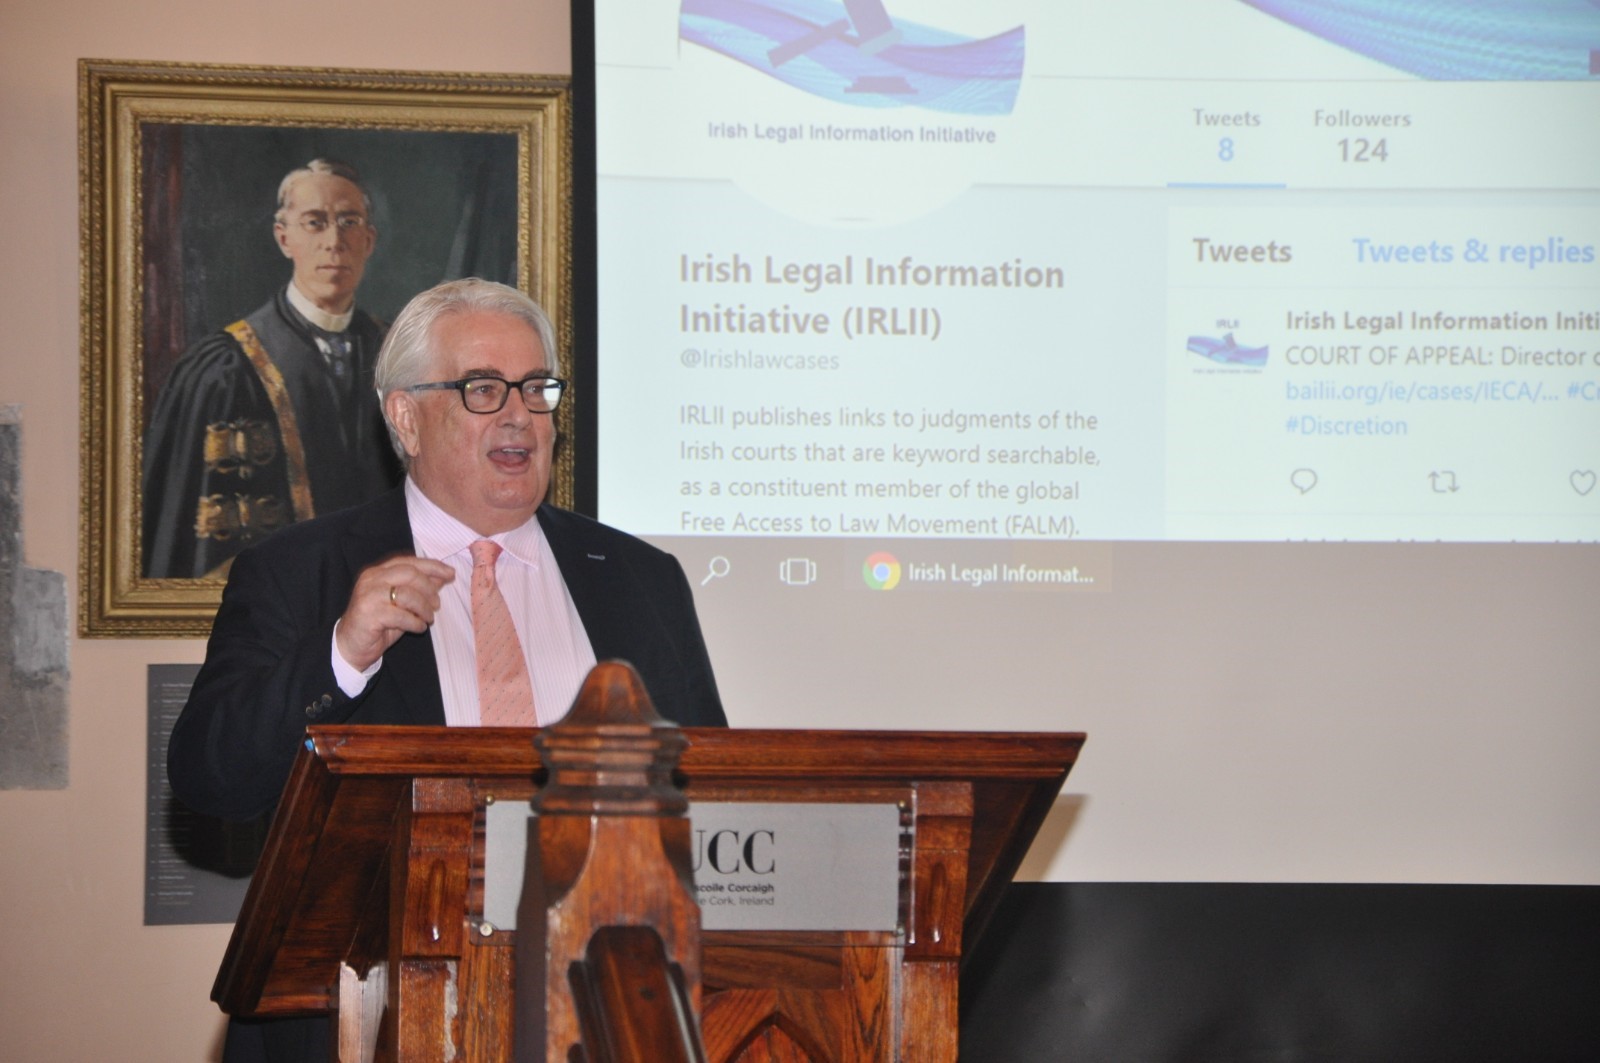 Chief Justice of Ireland, the Hon Mr Justice Frank Clarke speaking at the relaunch of the Irish Legal Information Initiative